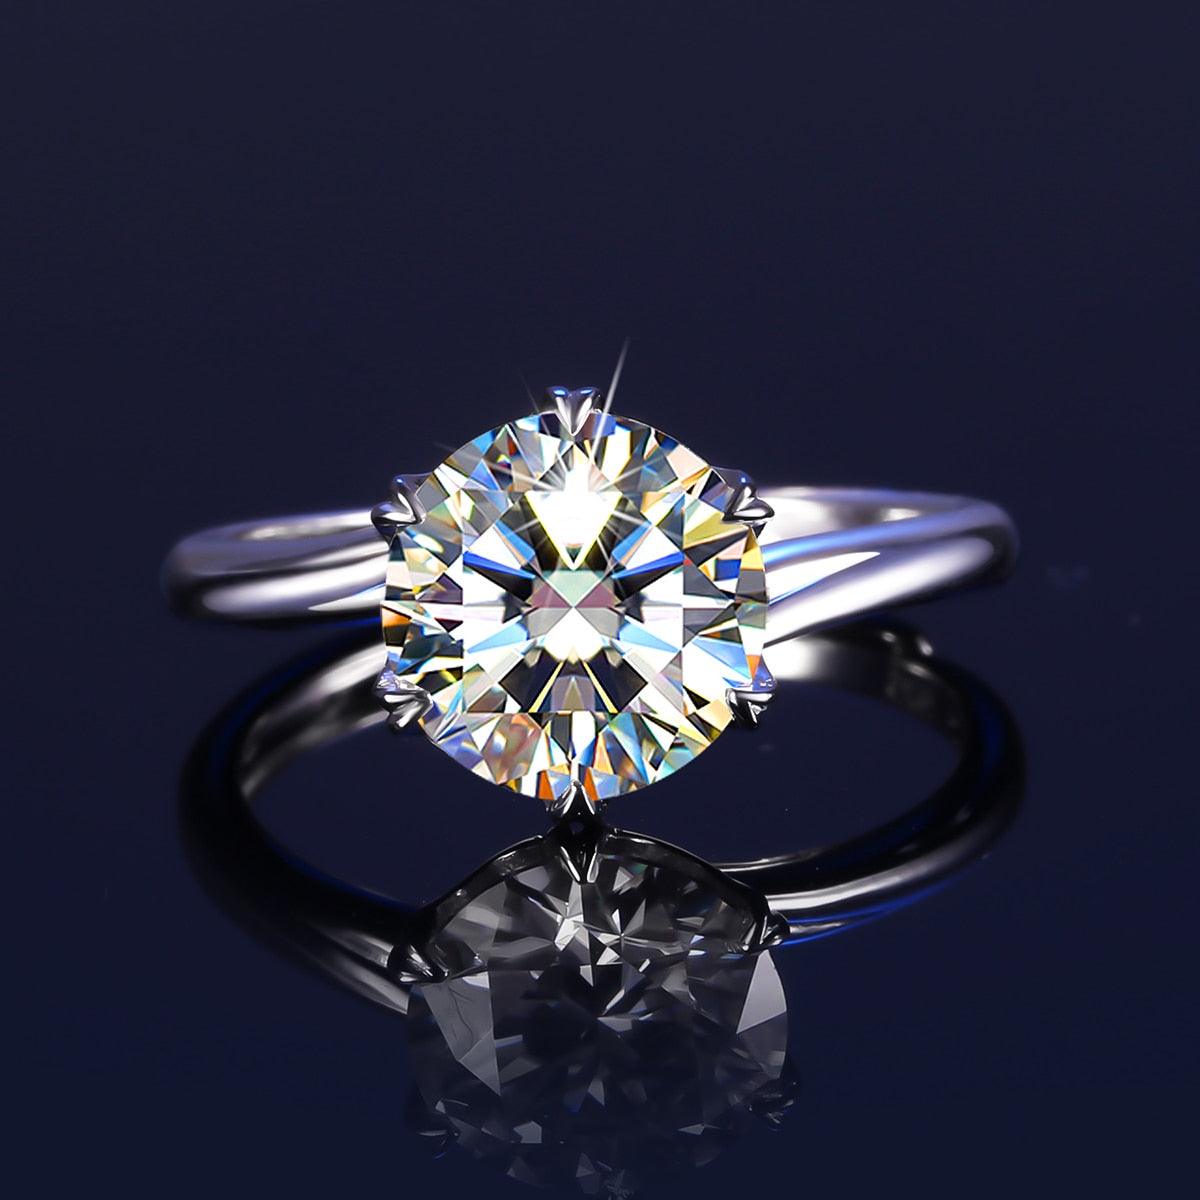 Real 3 Carats D Color High Quality Moissanite Diamonds Adjustable Rings - 6 Prong Setting Fine Jewellery - The Jewellery Supermarket